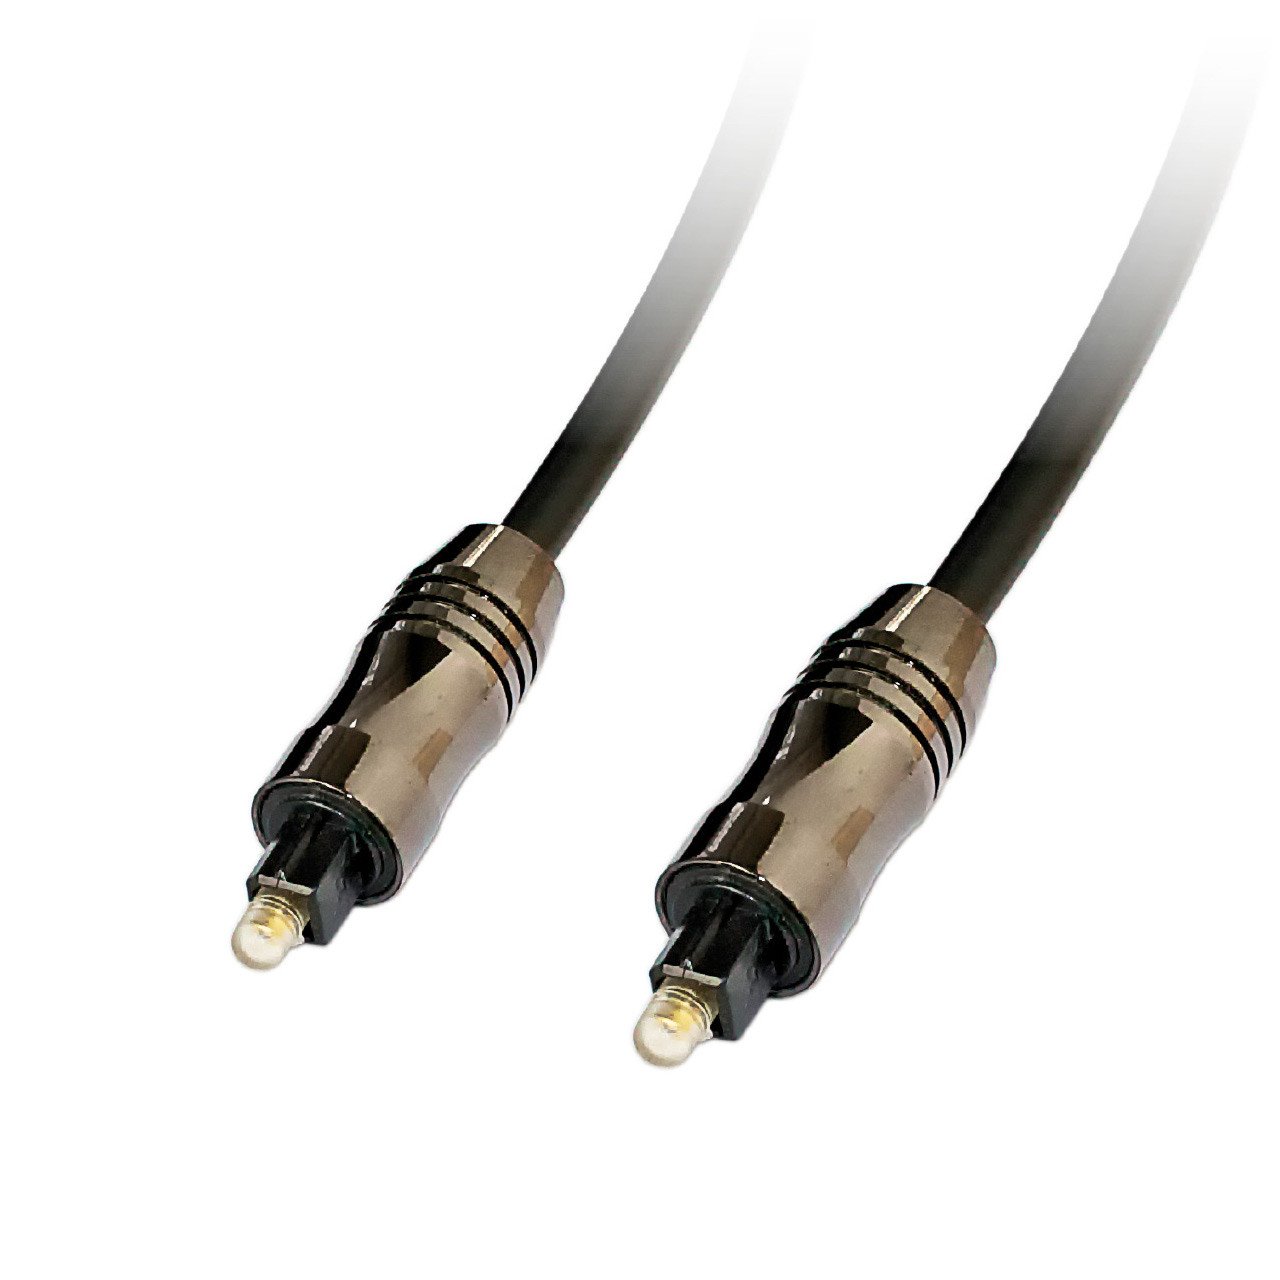 Cables & Adapters - ALVA Professional Optical TOSLINK Lightpipe Cable For ADAT Or SPDIF Format